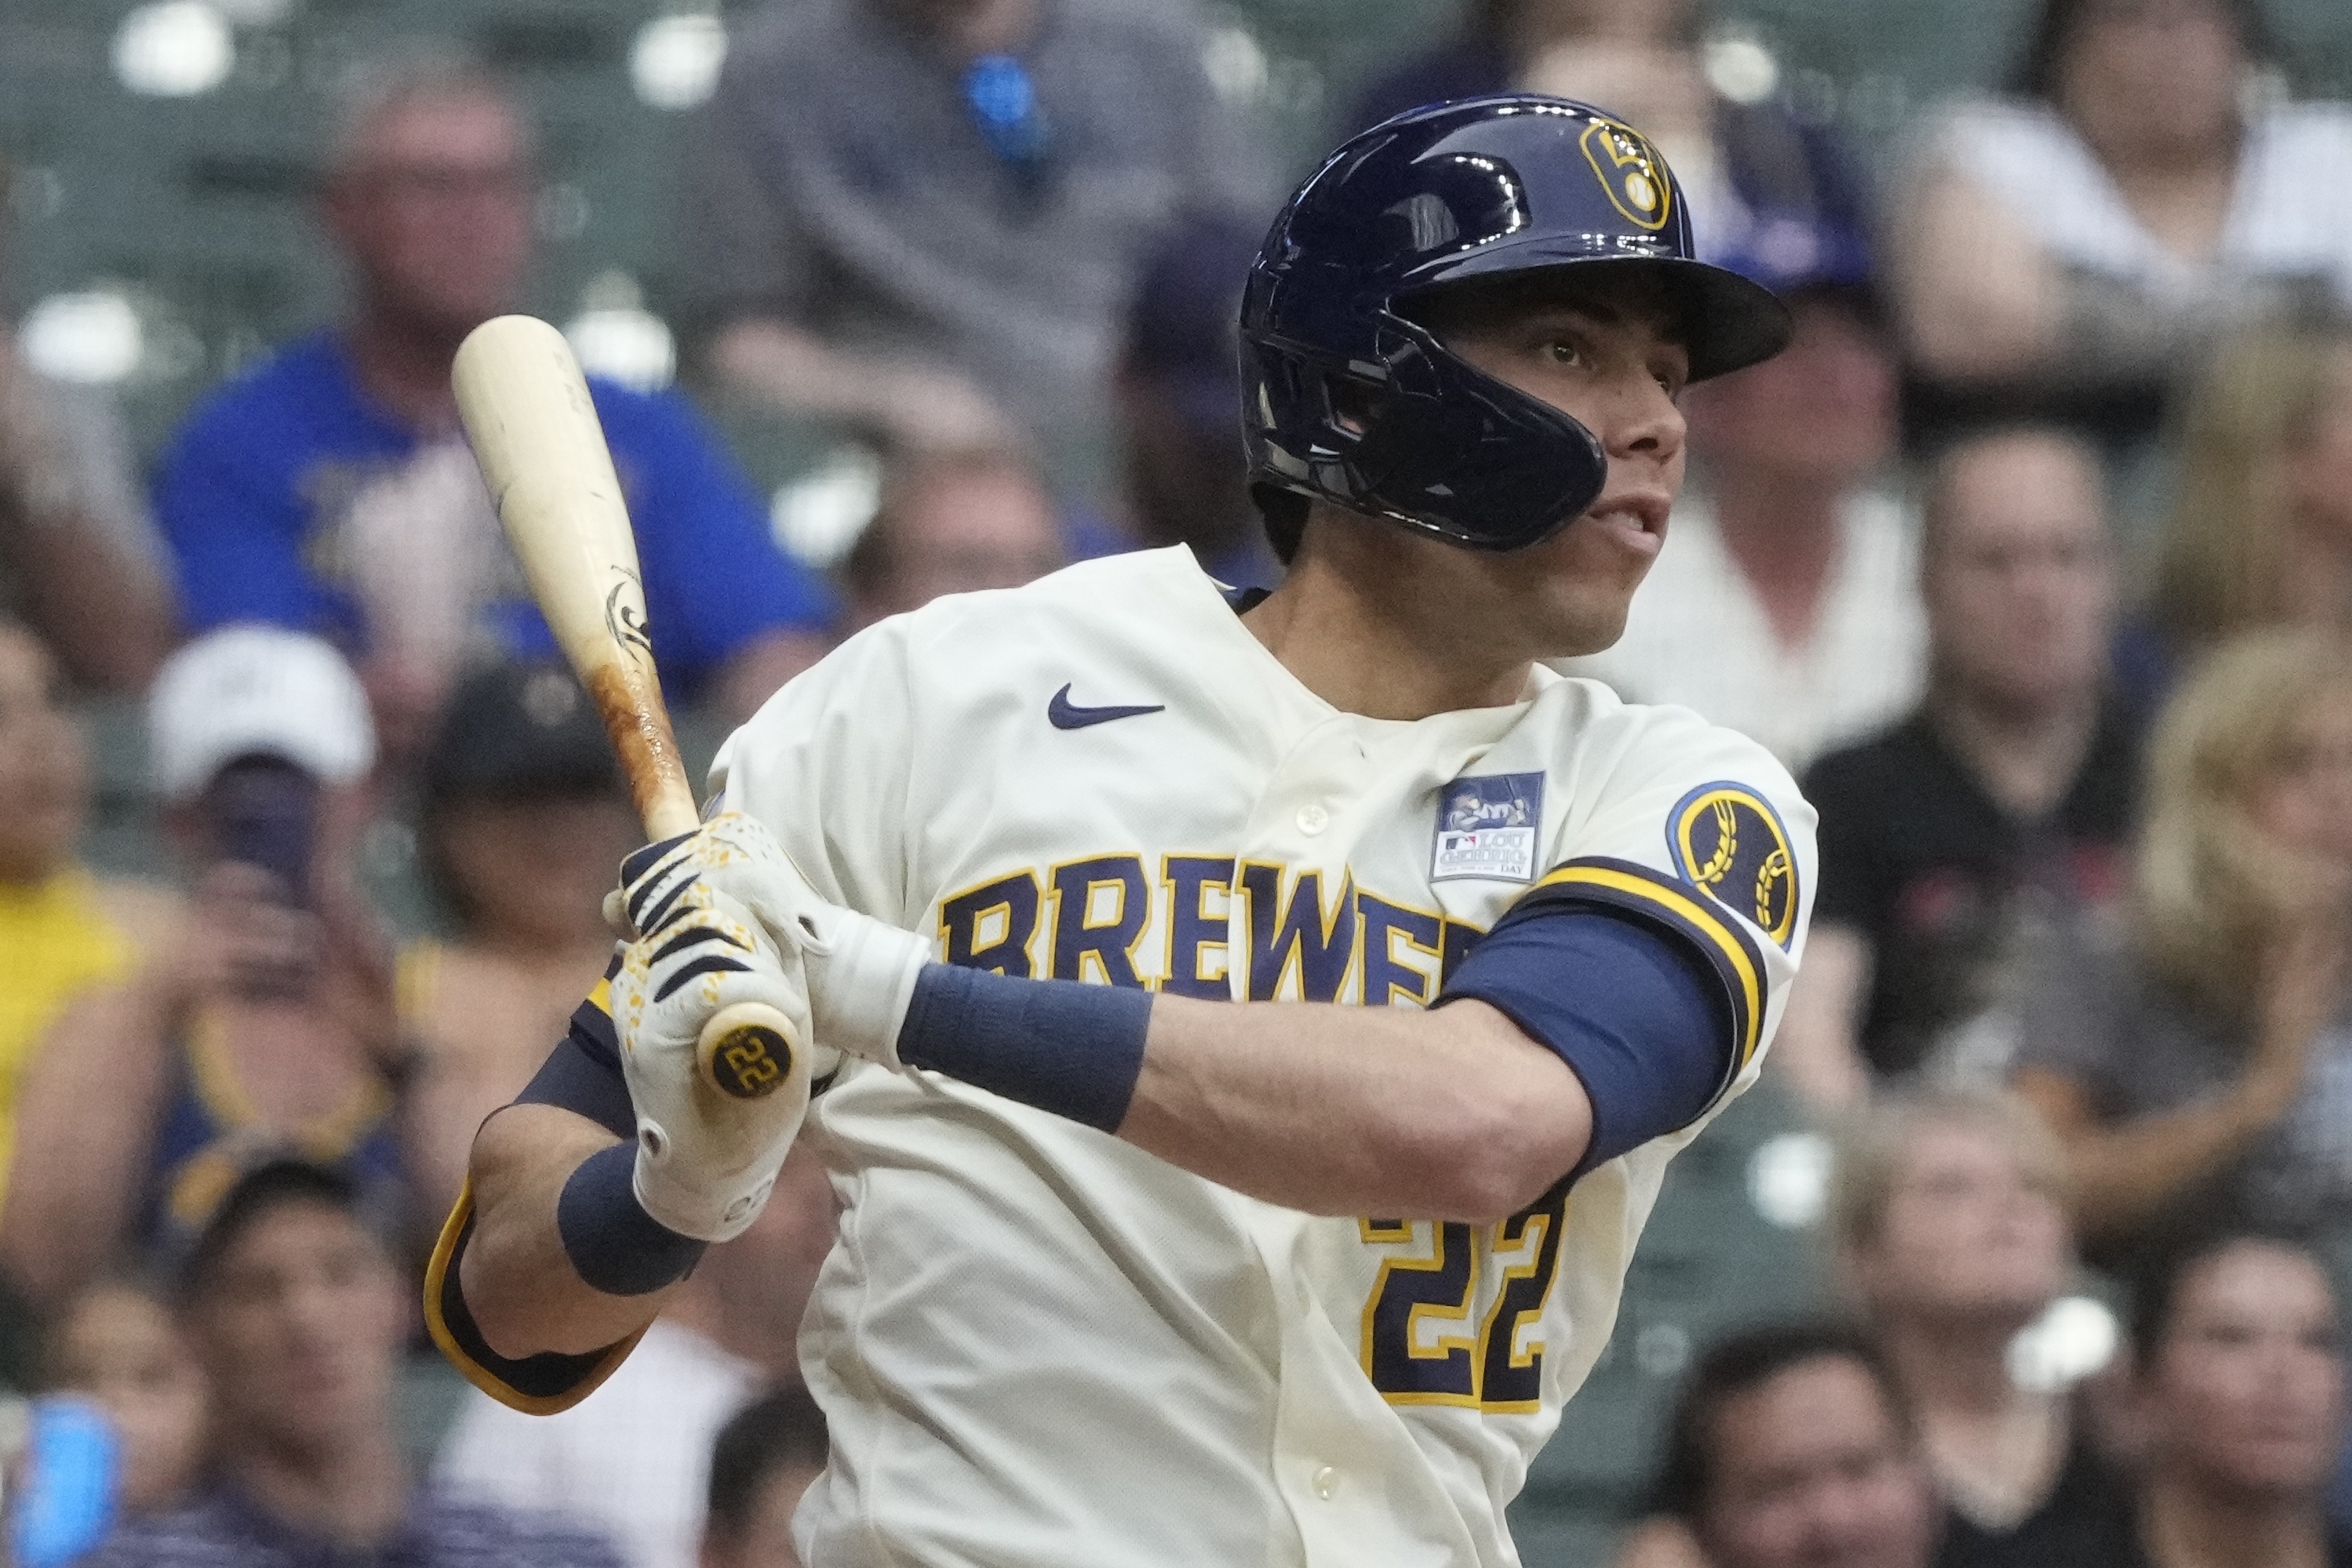 CasWell Informed: Breaking Down Christian Yelich - Brewers - Brewer Fanatic